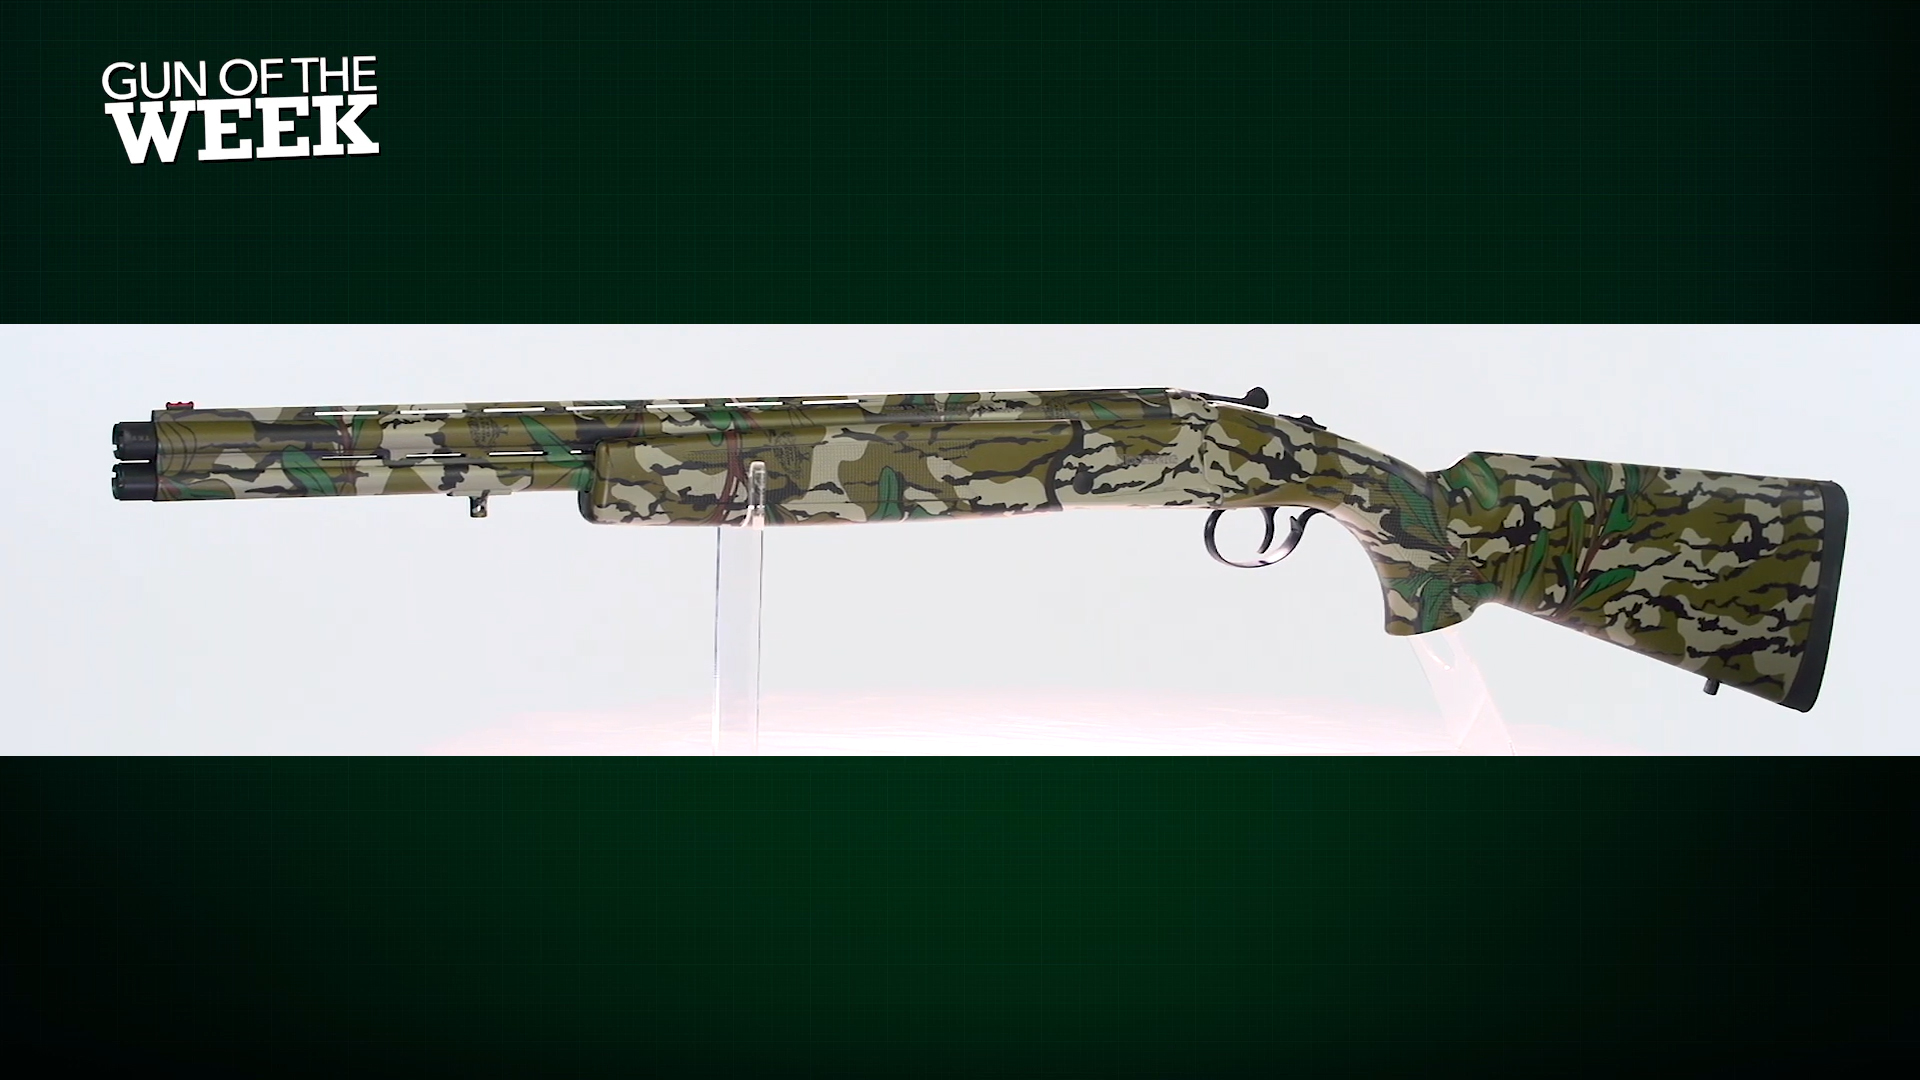 Mossberg International Silver Reserve Eventide Turkey over-under camouflage shotgun left-side view on white text on image noting GUN OF THE WEEK